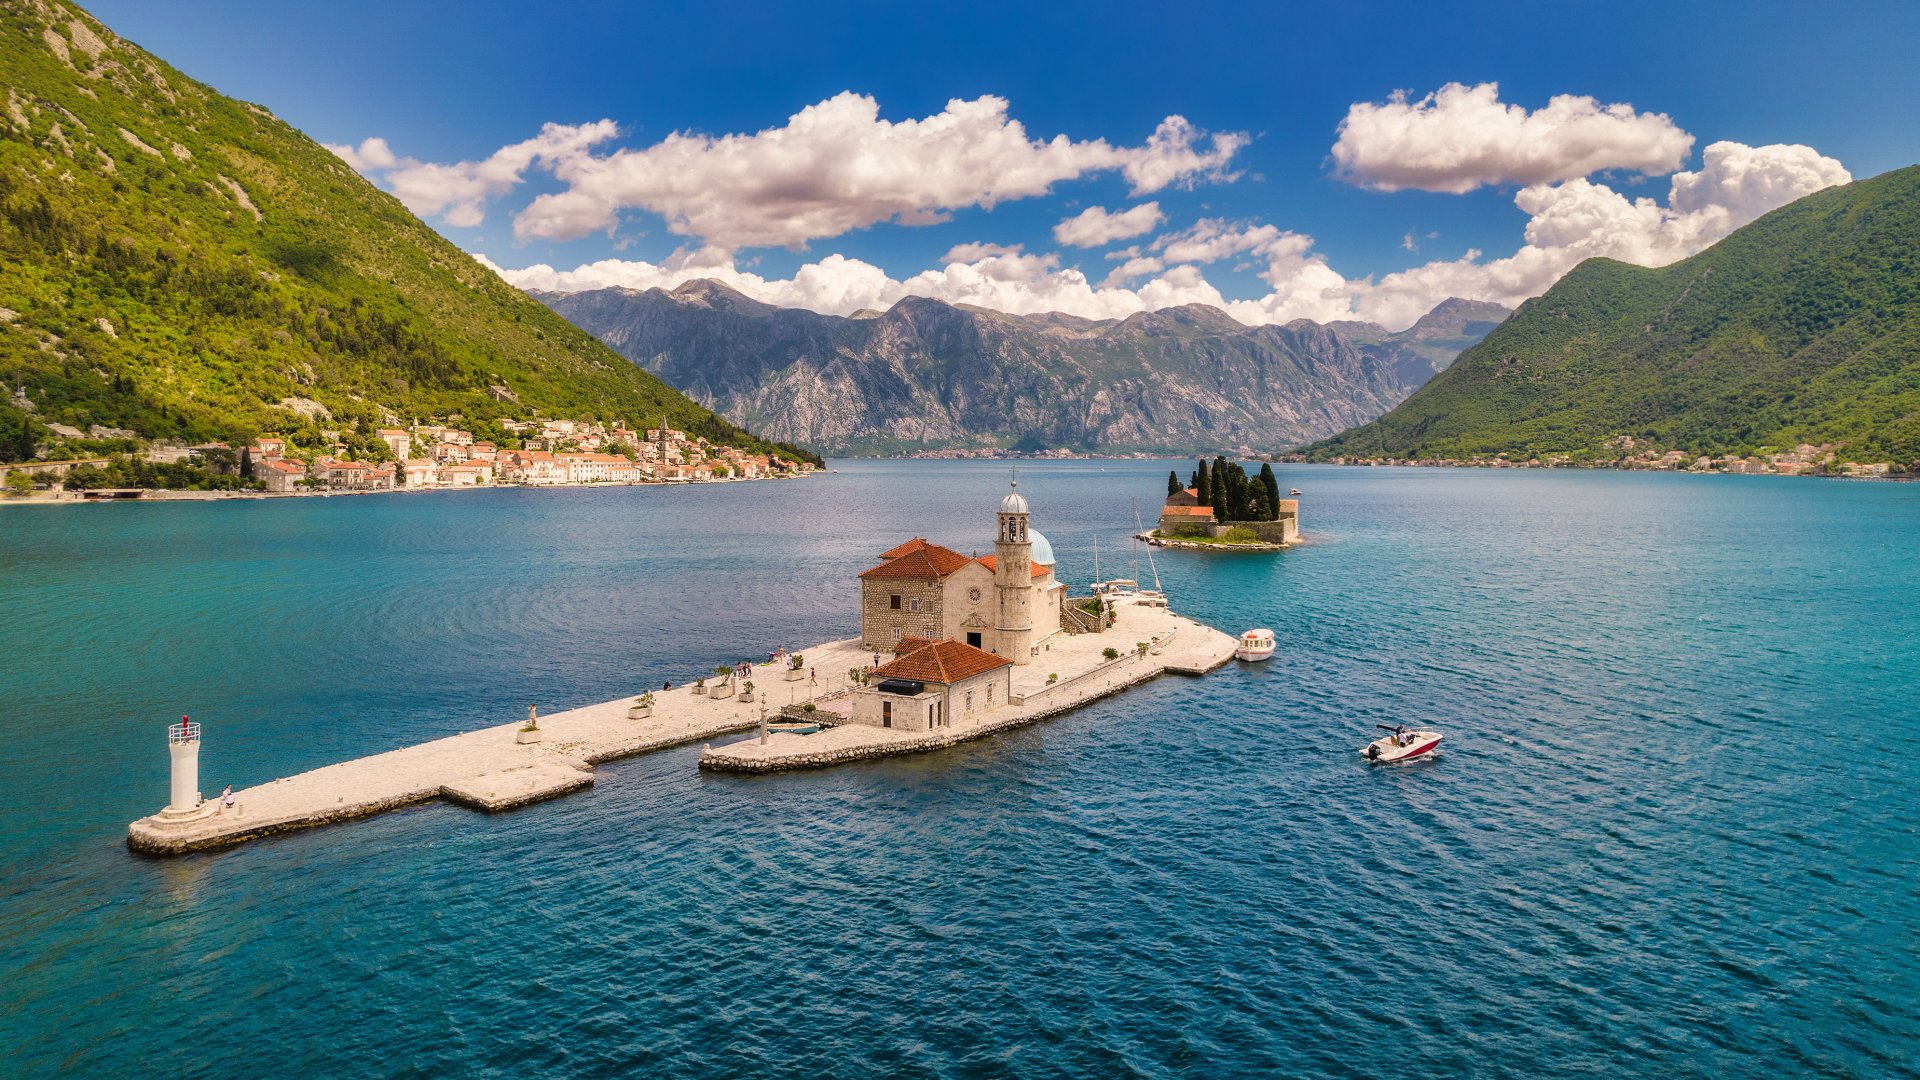 Saint George Island and Our Lady of the Rocks in the Bay of Kotor, Perast, Montenegro by Dmitrii Sakharov